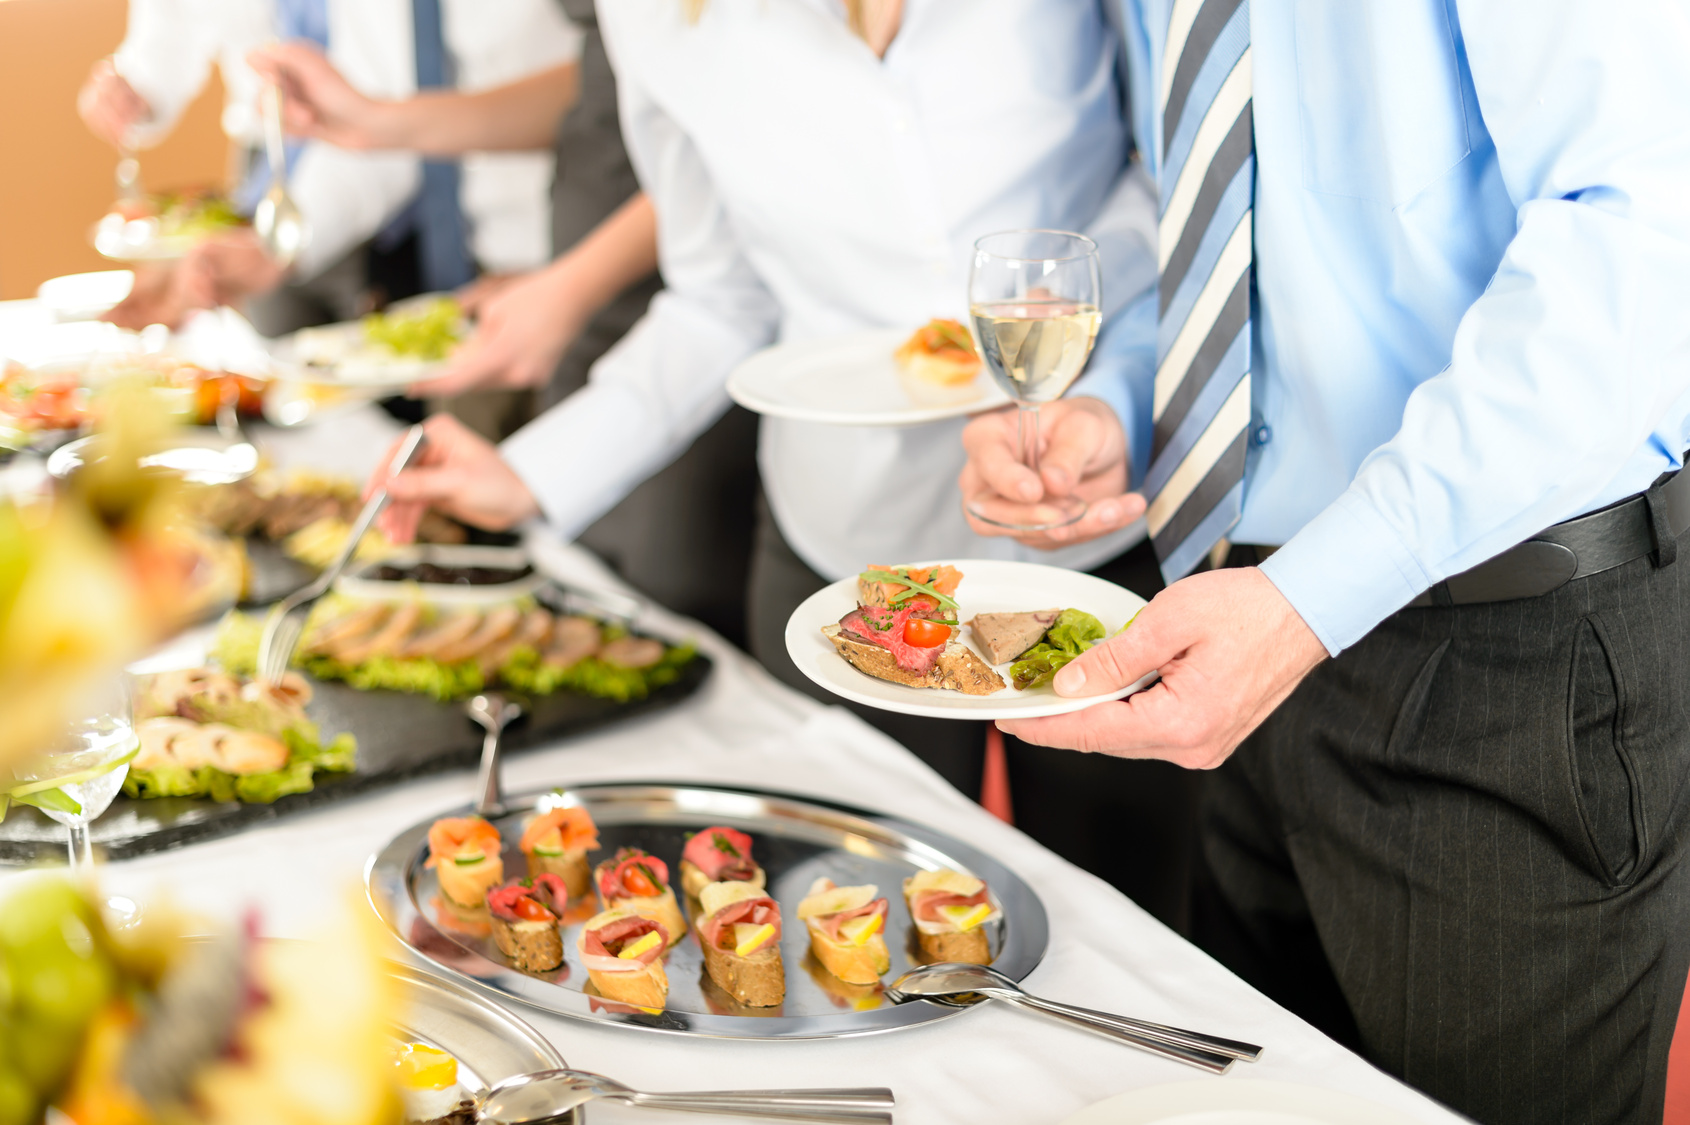 What is catering and how to choose a catering company